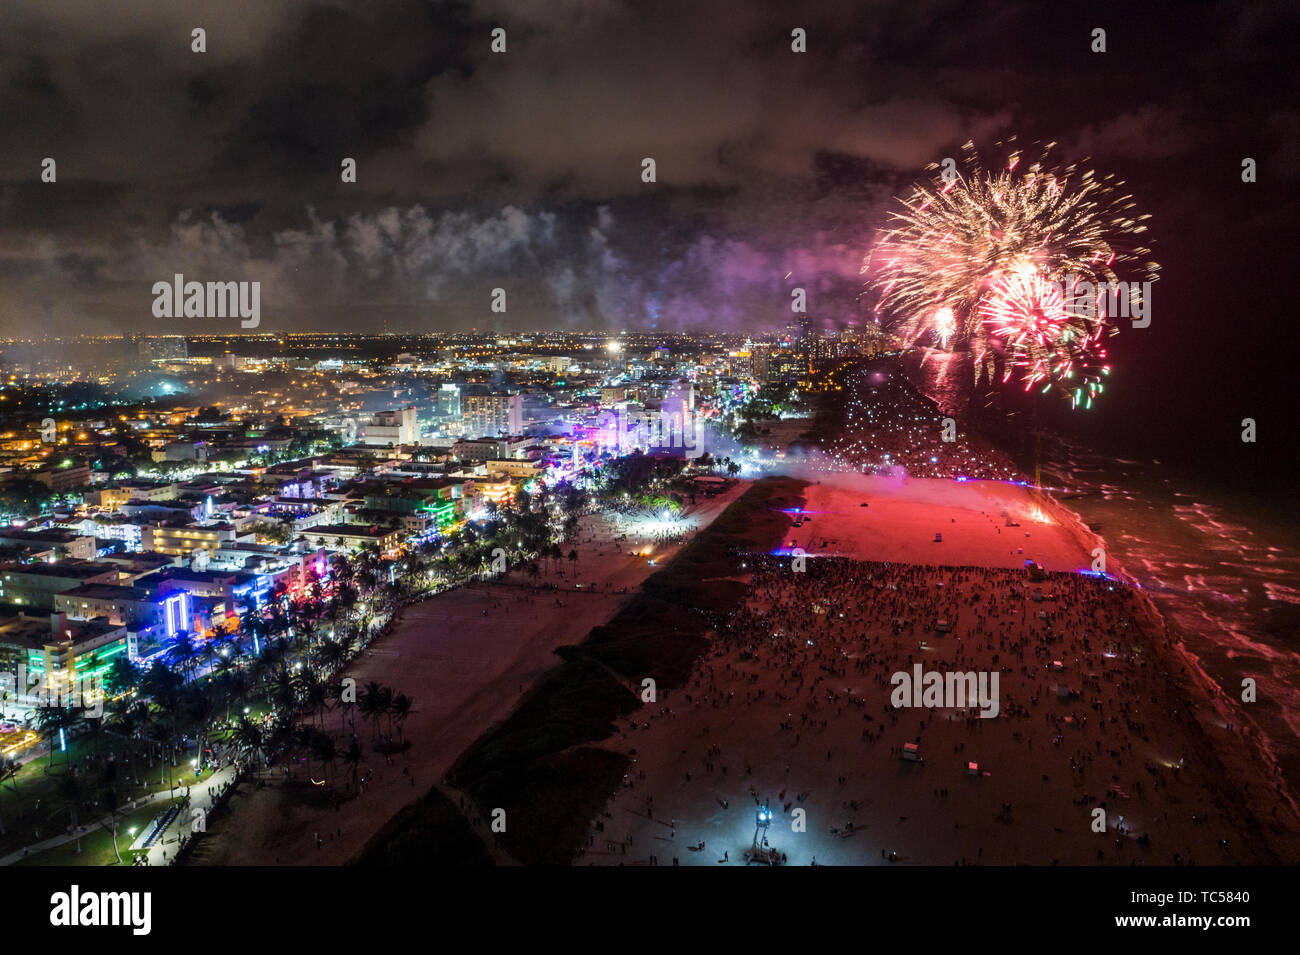 Miami Beach Florida,New Year’s Eve fireworks display celebration,aerial overhead view from above,FL190101d04 Stock Photo